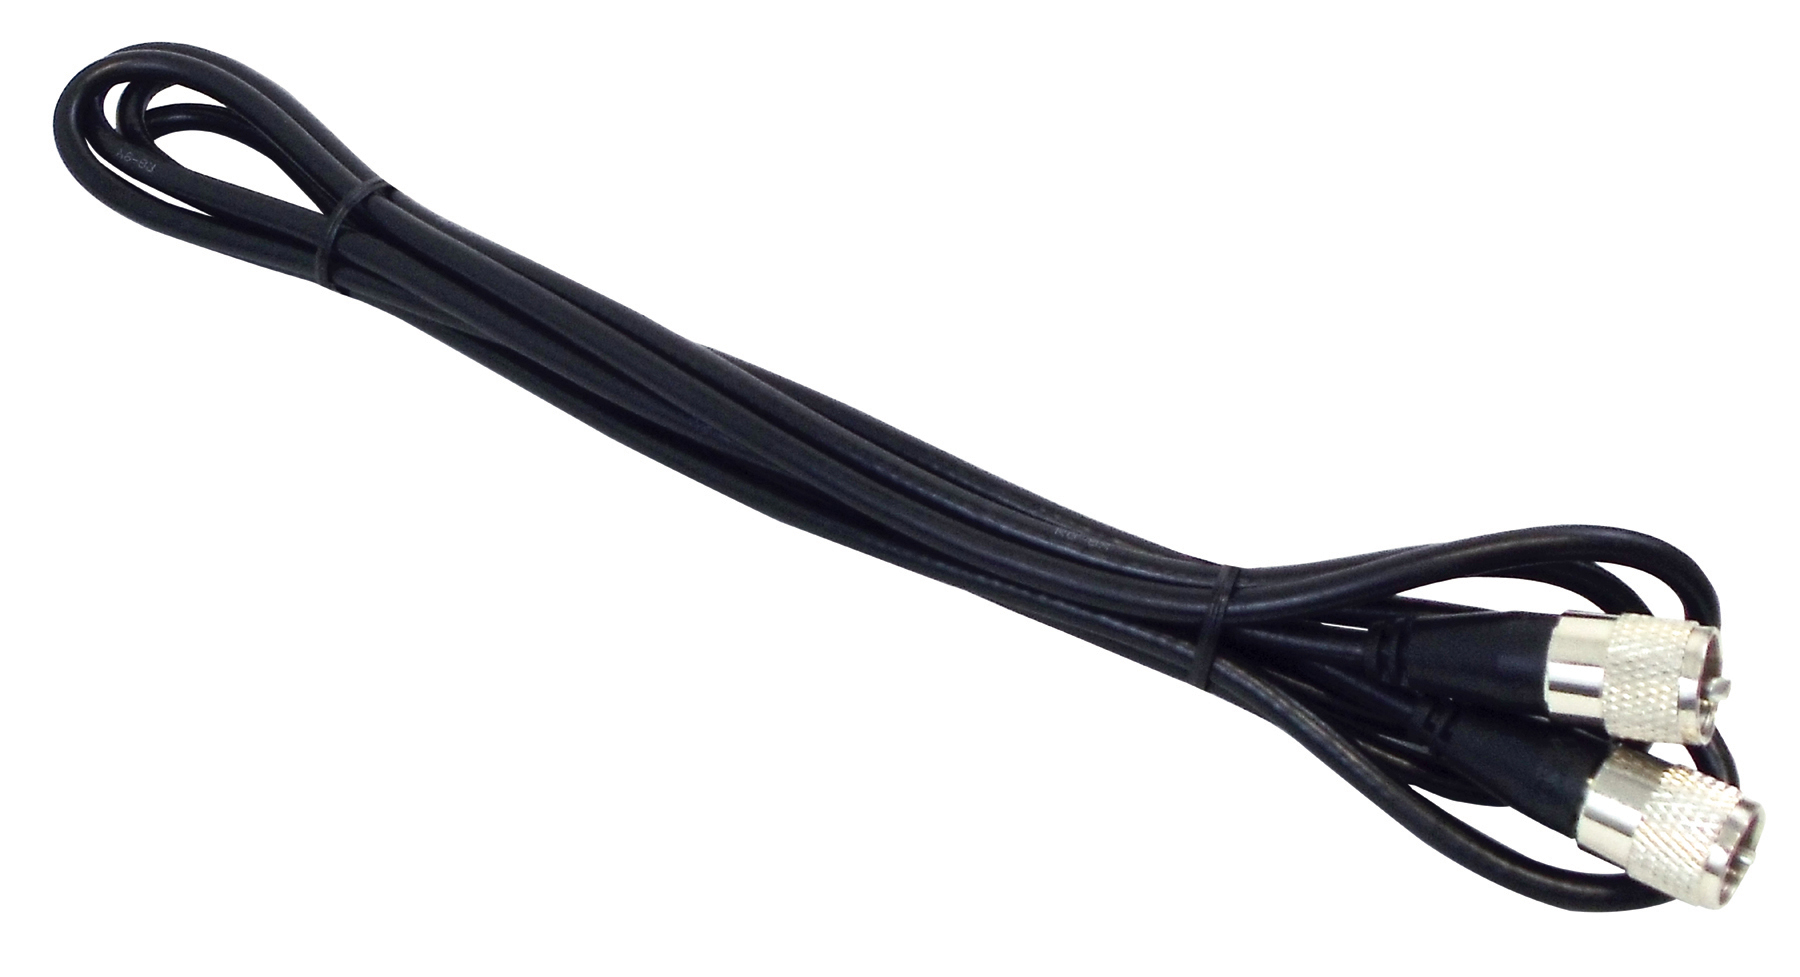 Kalibur 6.0 Foot Black Rg8X Coax Cable Assembly With Molded Pl259 Connectors On Each End